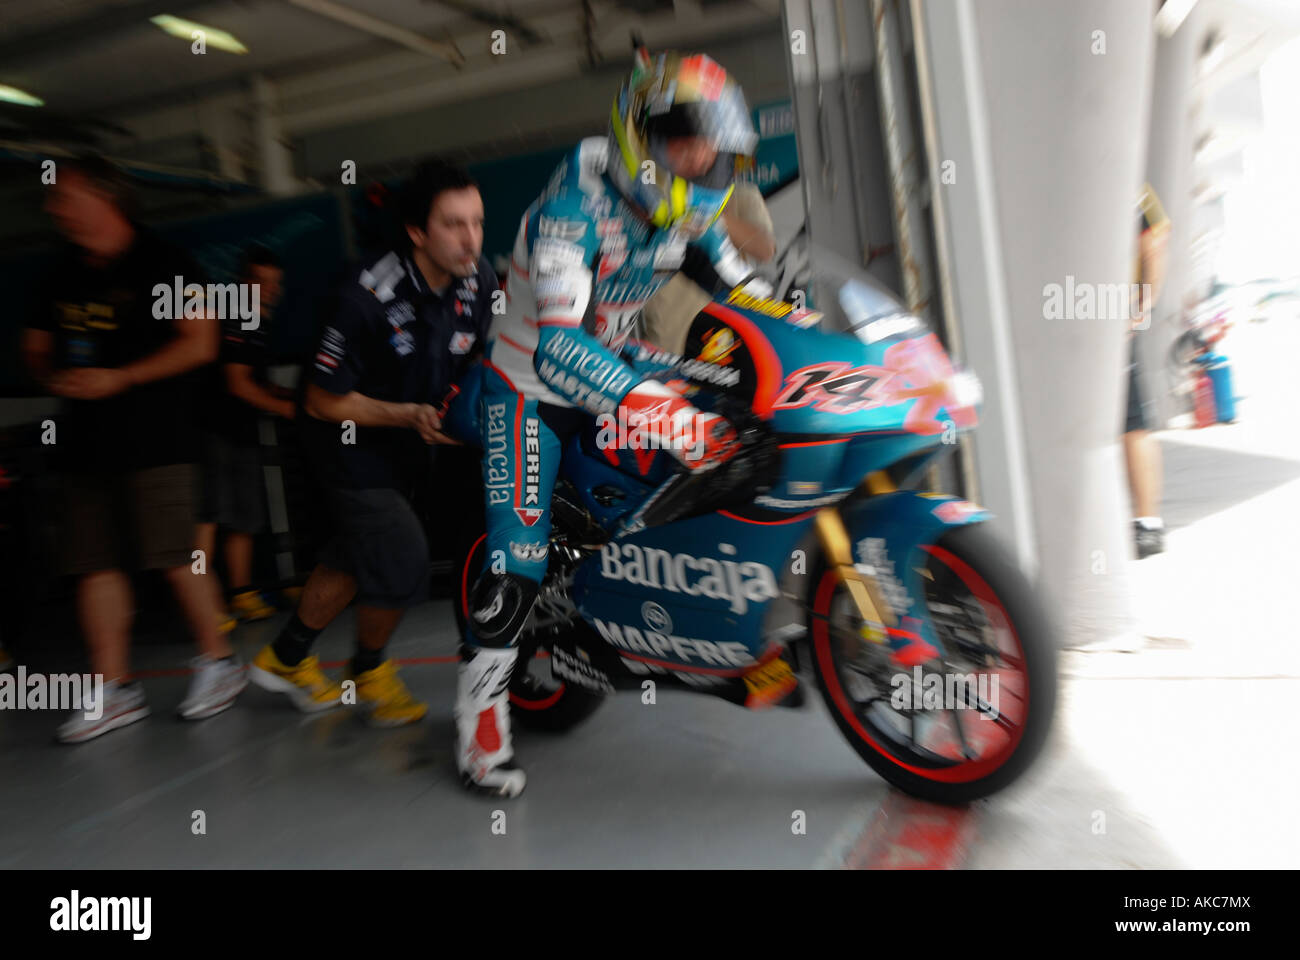 Zoom burst effect of 125cc rider Gabor Talmacsi being pushed at race day Stock Photo